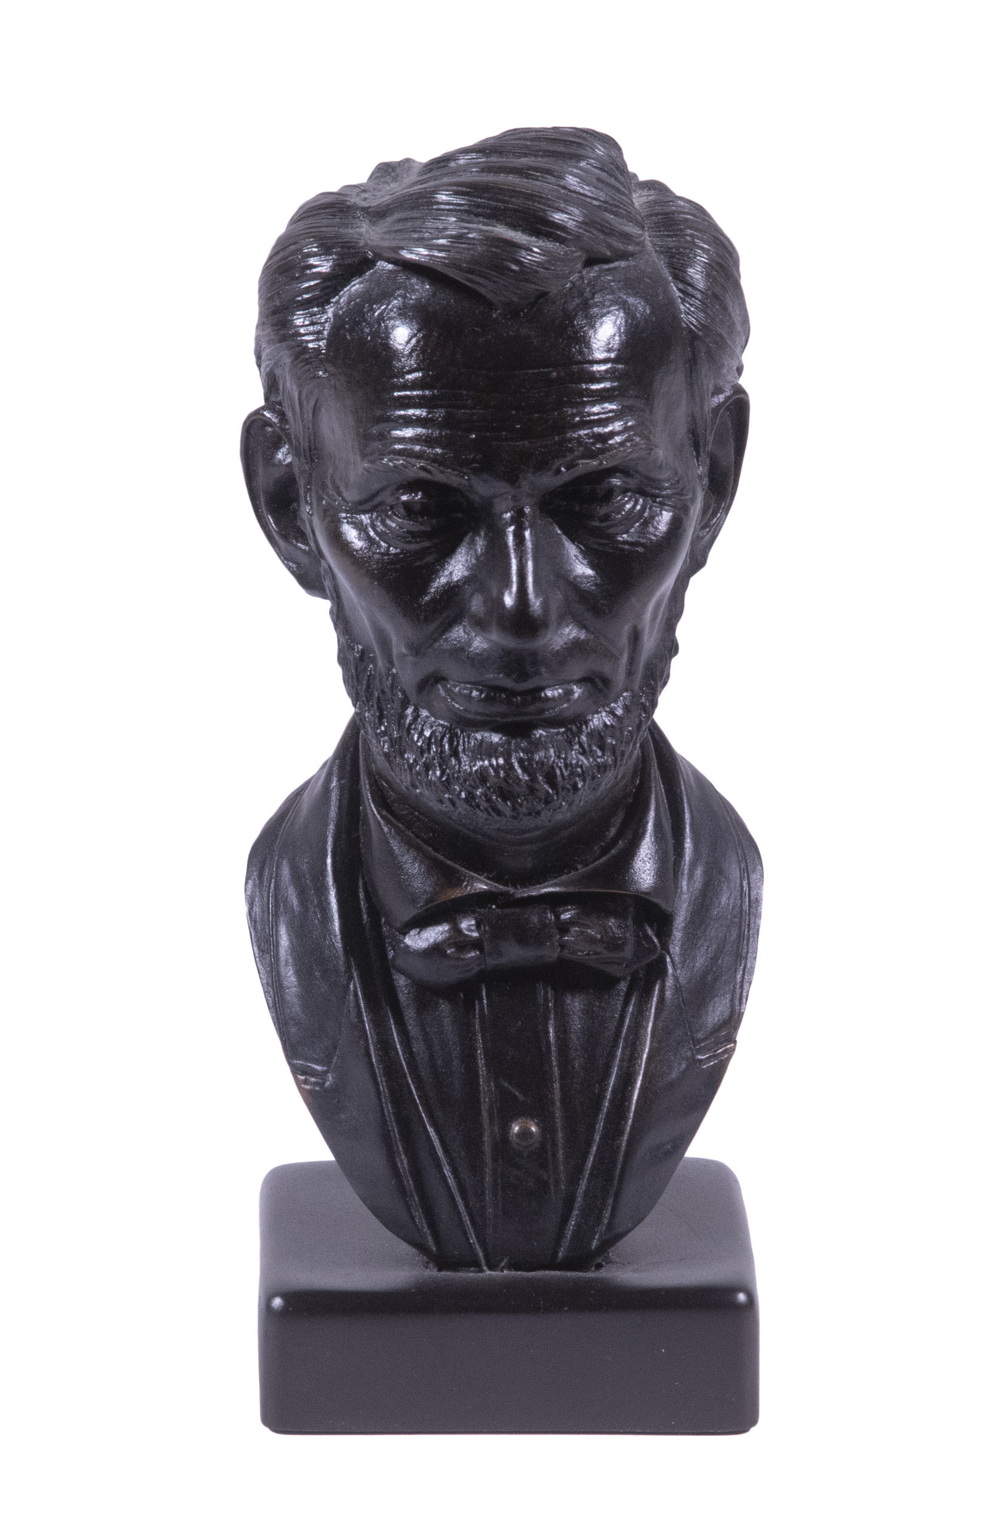 LINCOLN BUST PAPERWEIGHT Vintage